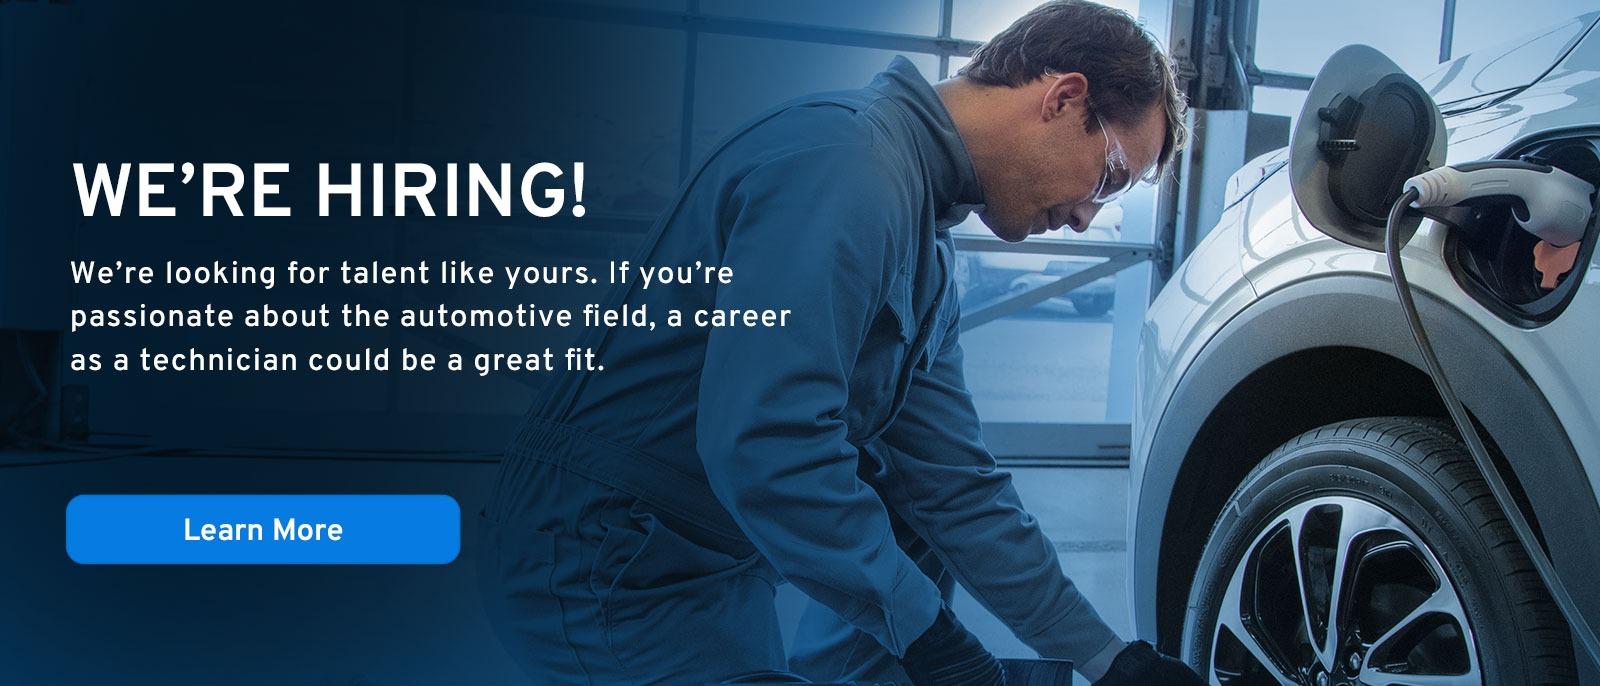 We're Hiring! We're looking for talent like yours. If you're passionate about the automotive field, a career as a technician could be a great fit. Learn More.